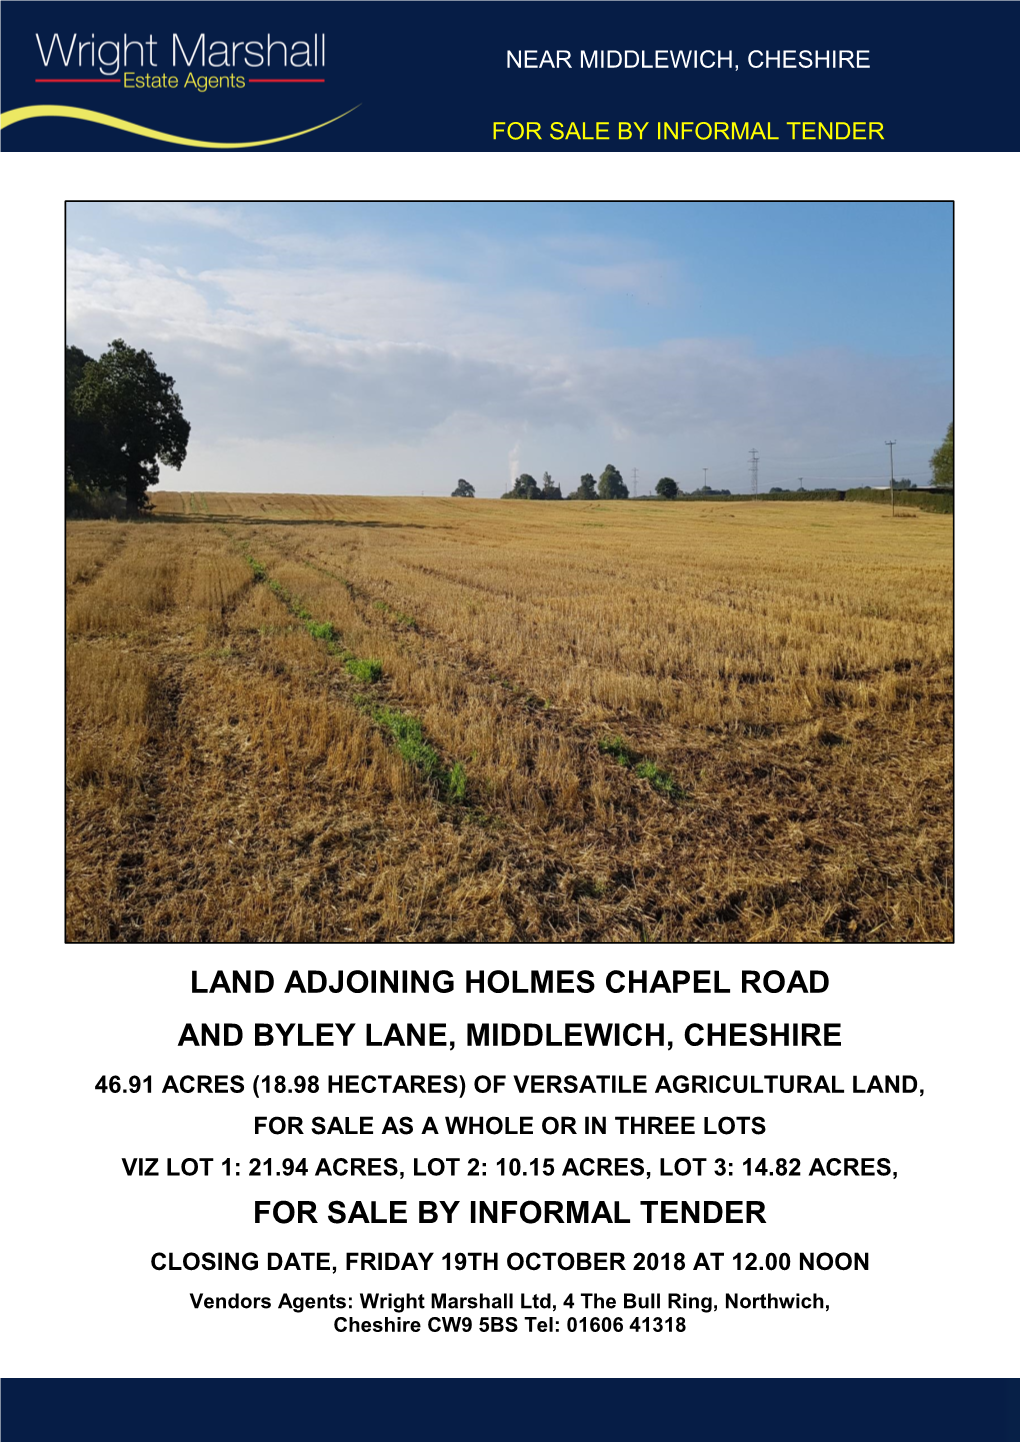 Land Adjoining Holmes Chapel Road and Byley Lane, Middlewich, Cheshire